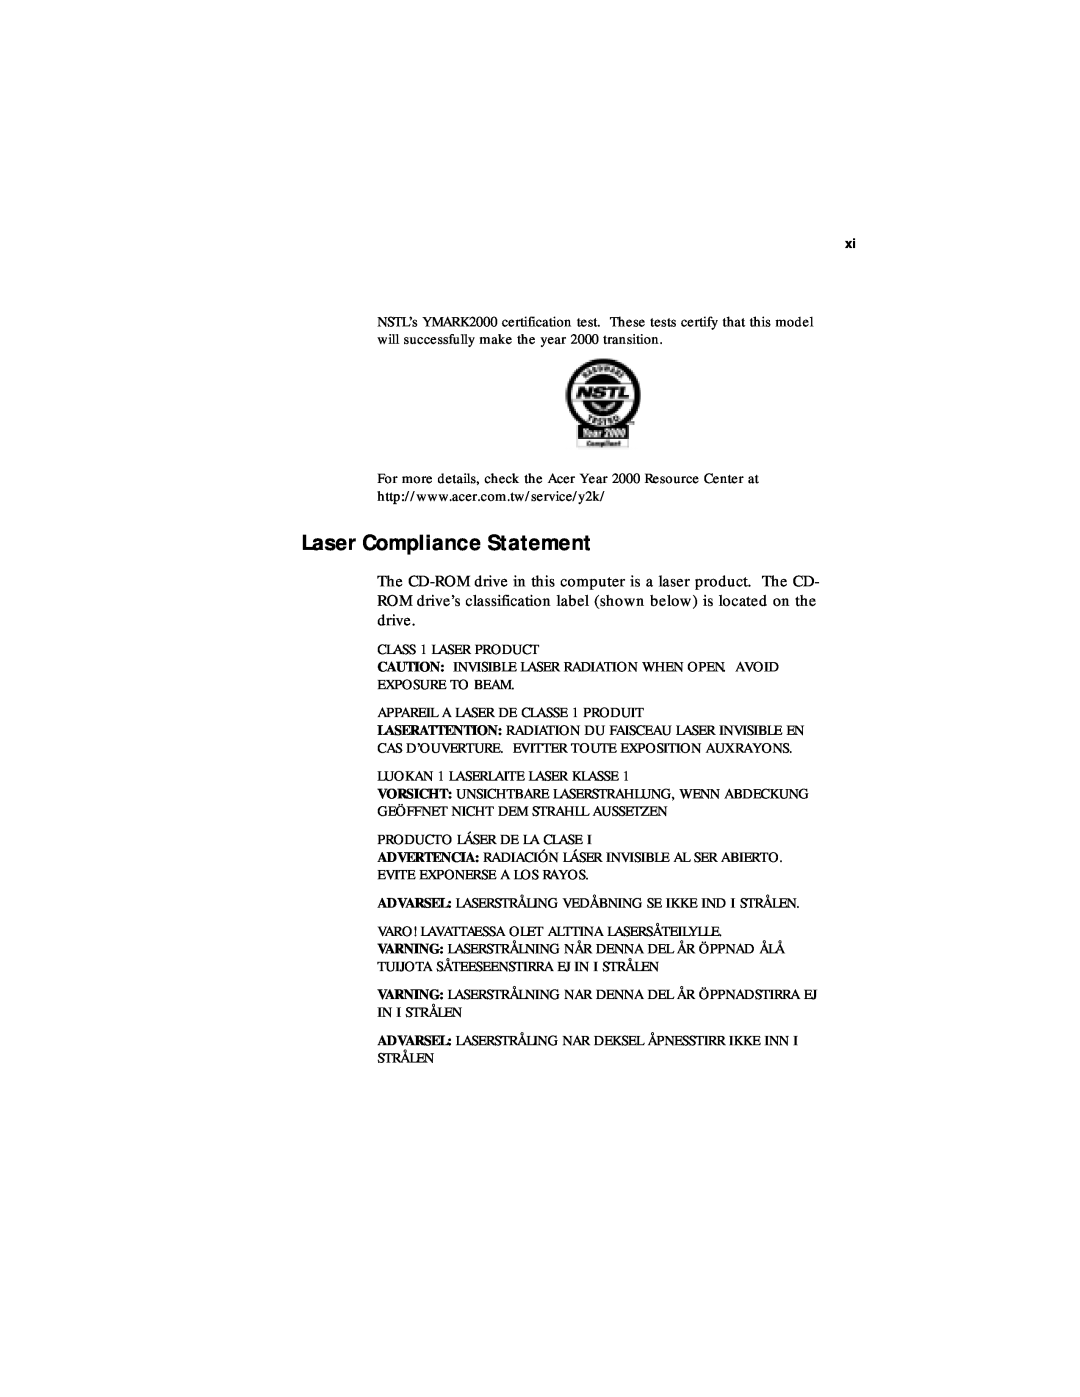 Acer 330 Series manual Laser Compliance Statement 